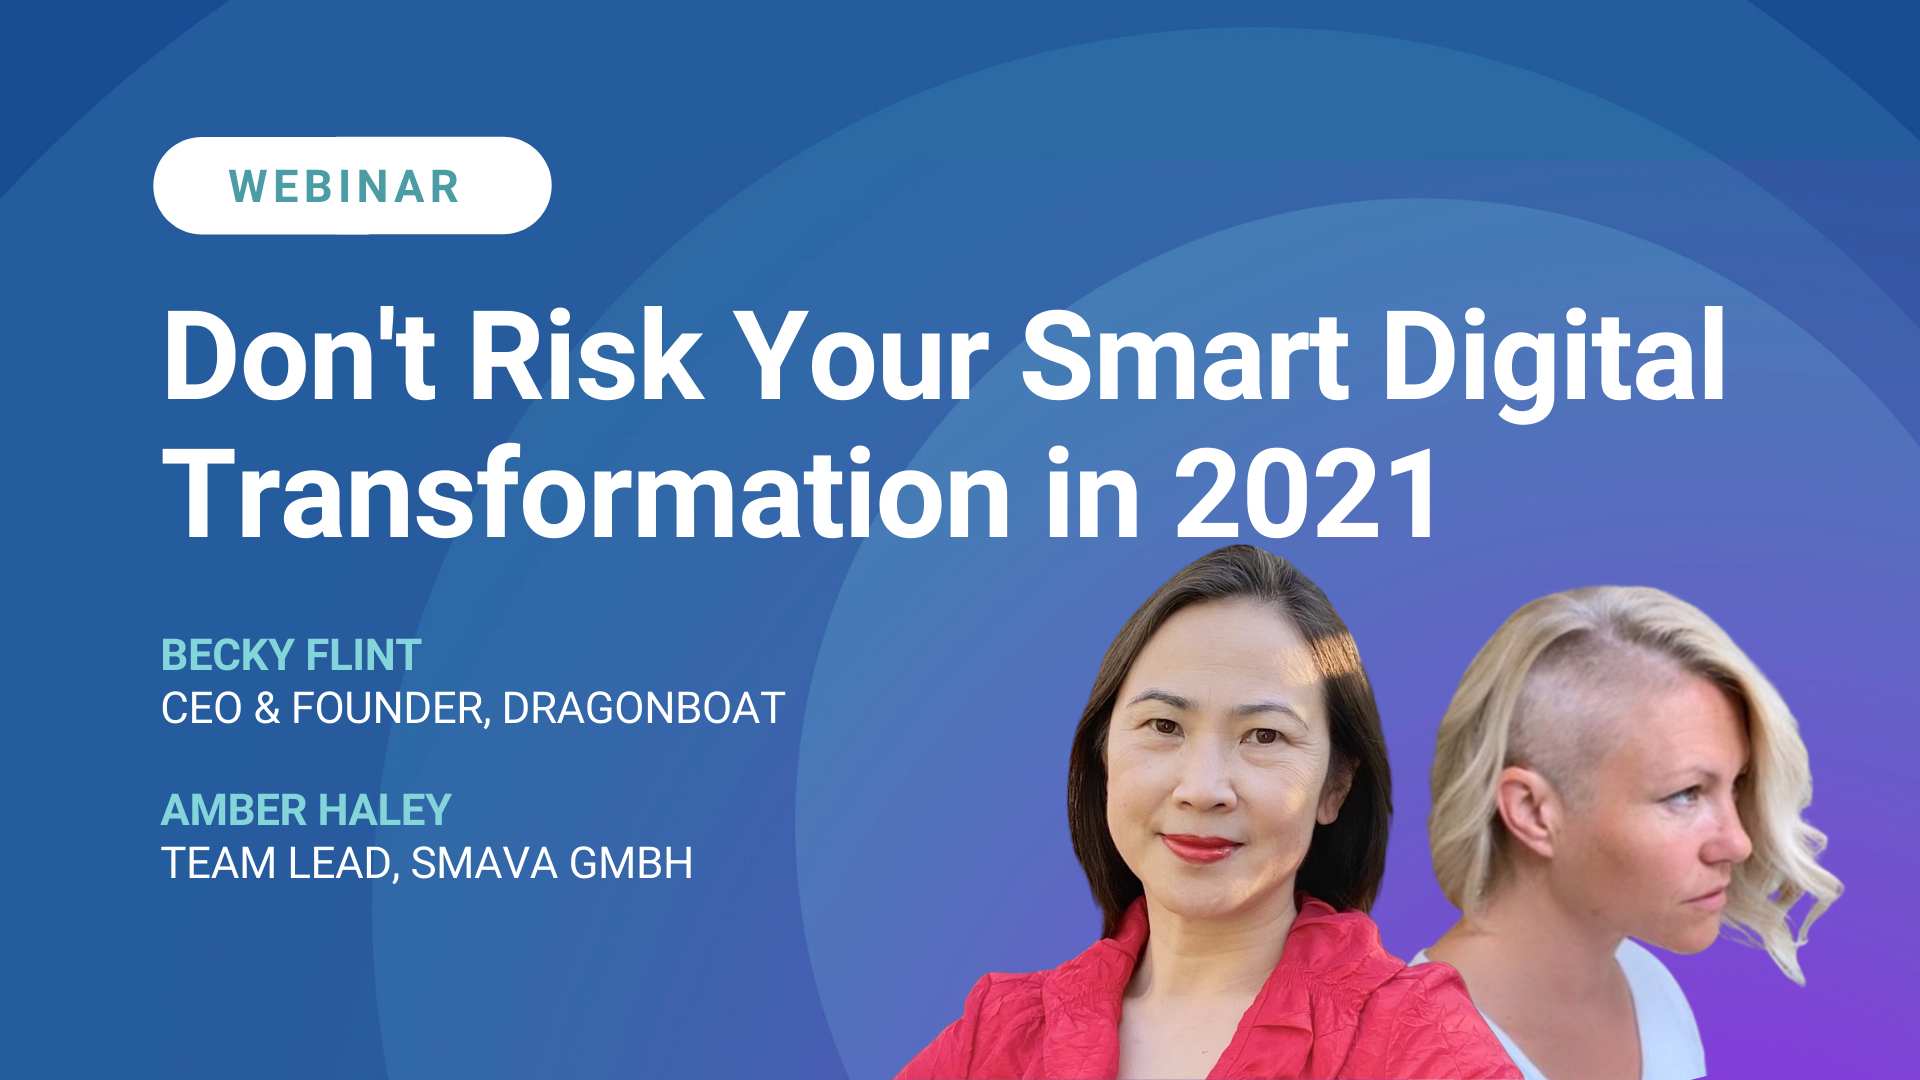 Don't Risk Your Smart Digital Transformation in 2021